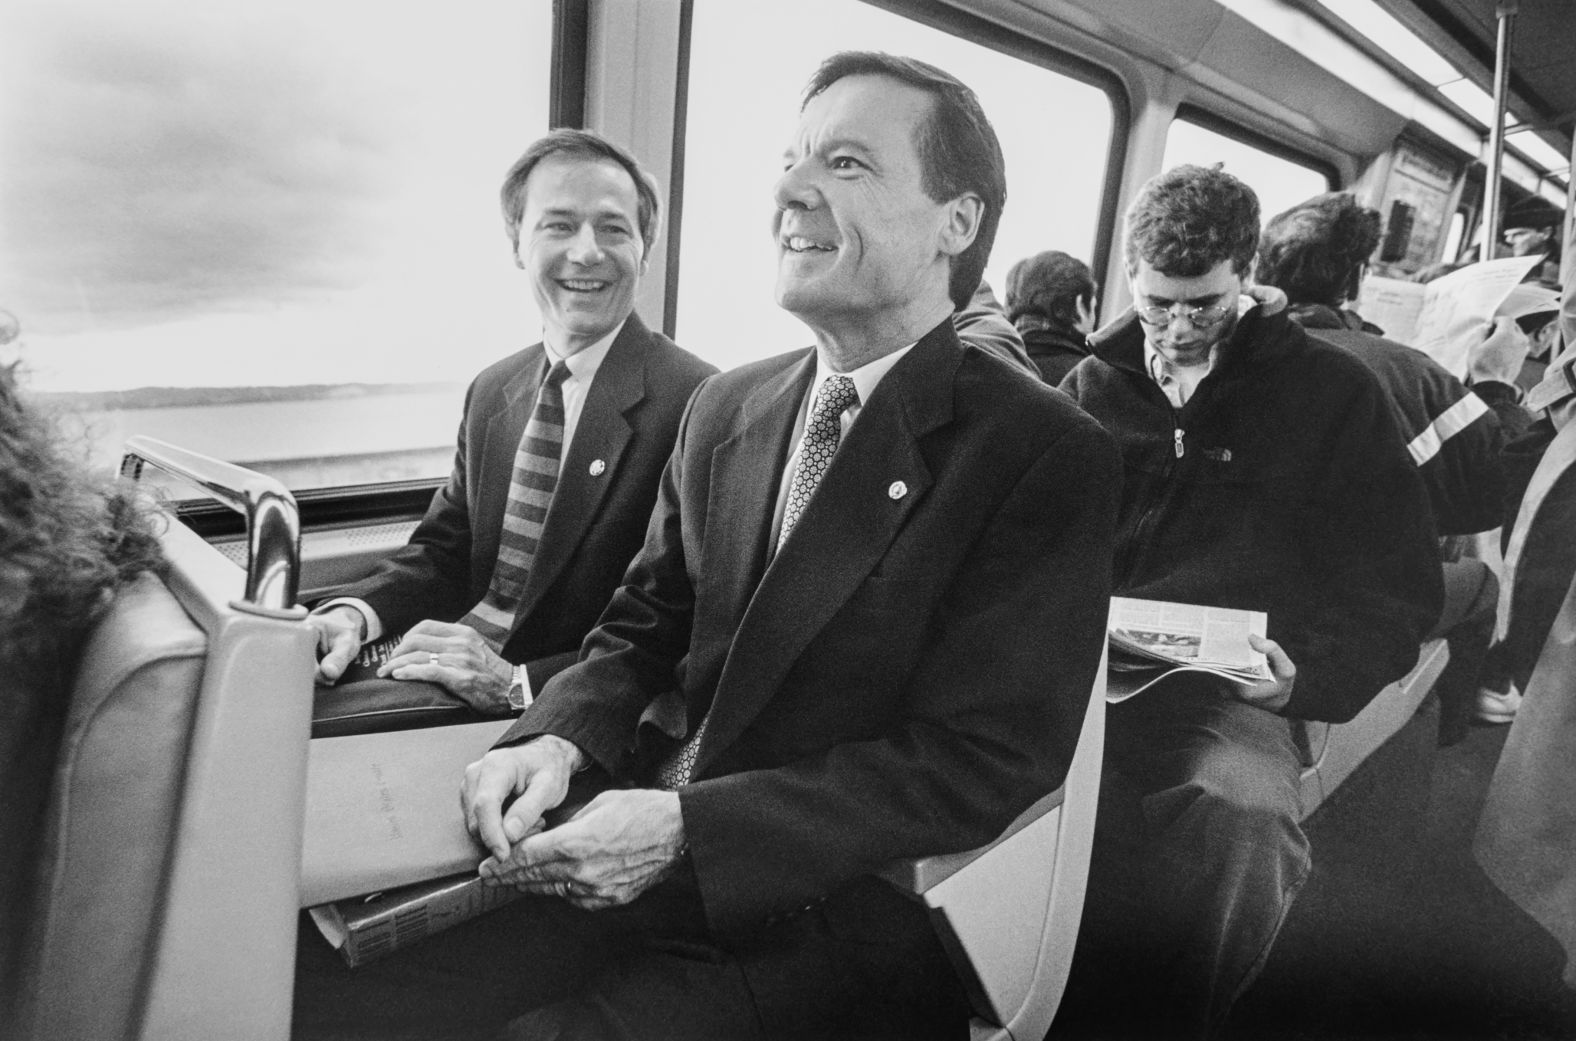 The Hutchinson brothers take the Metro to Capitol Hill in 1997.